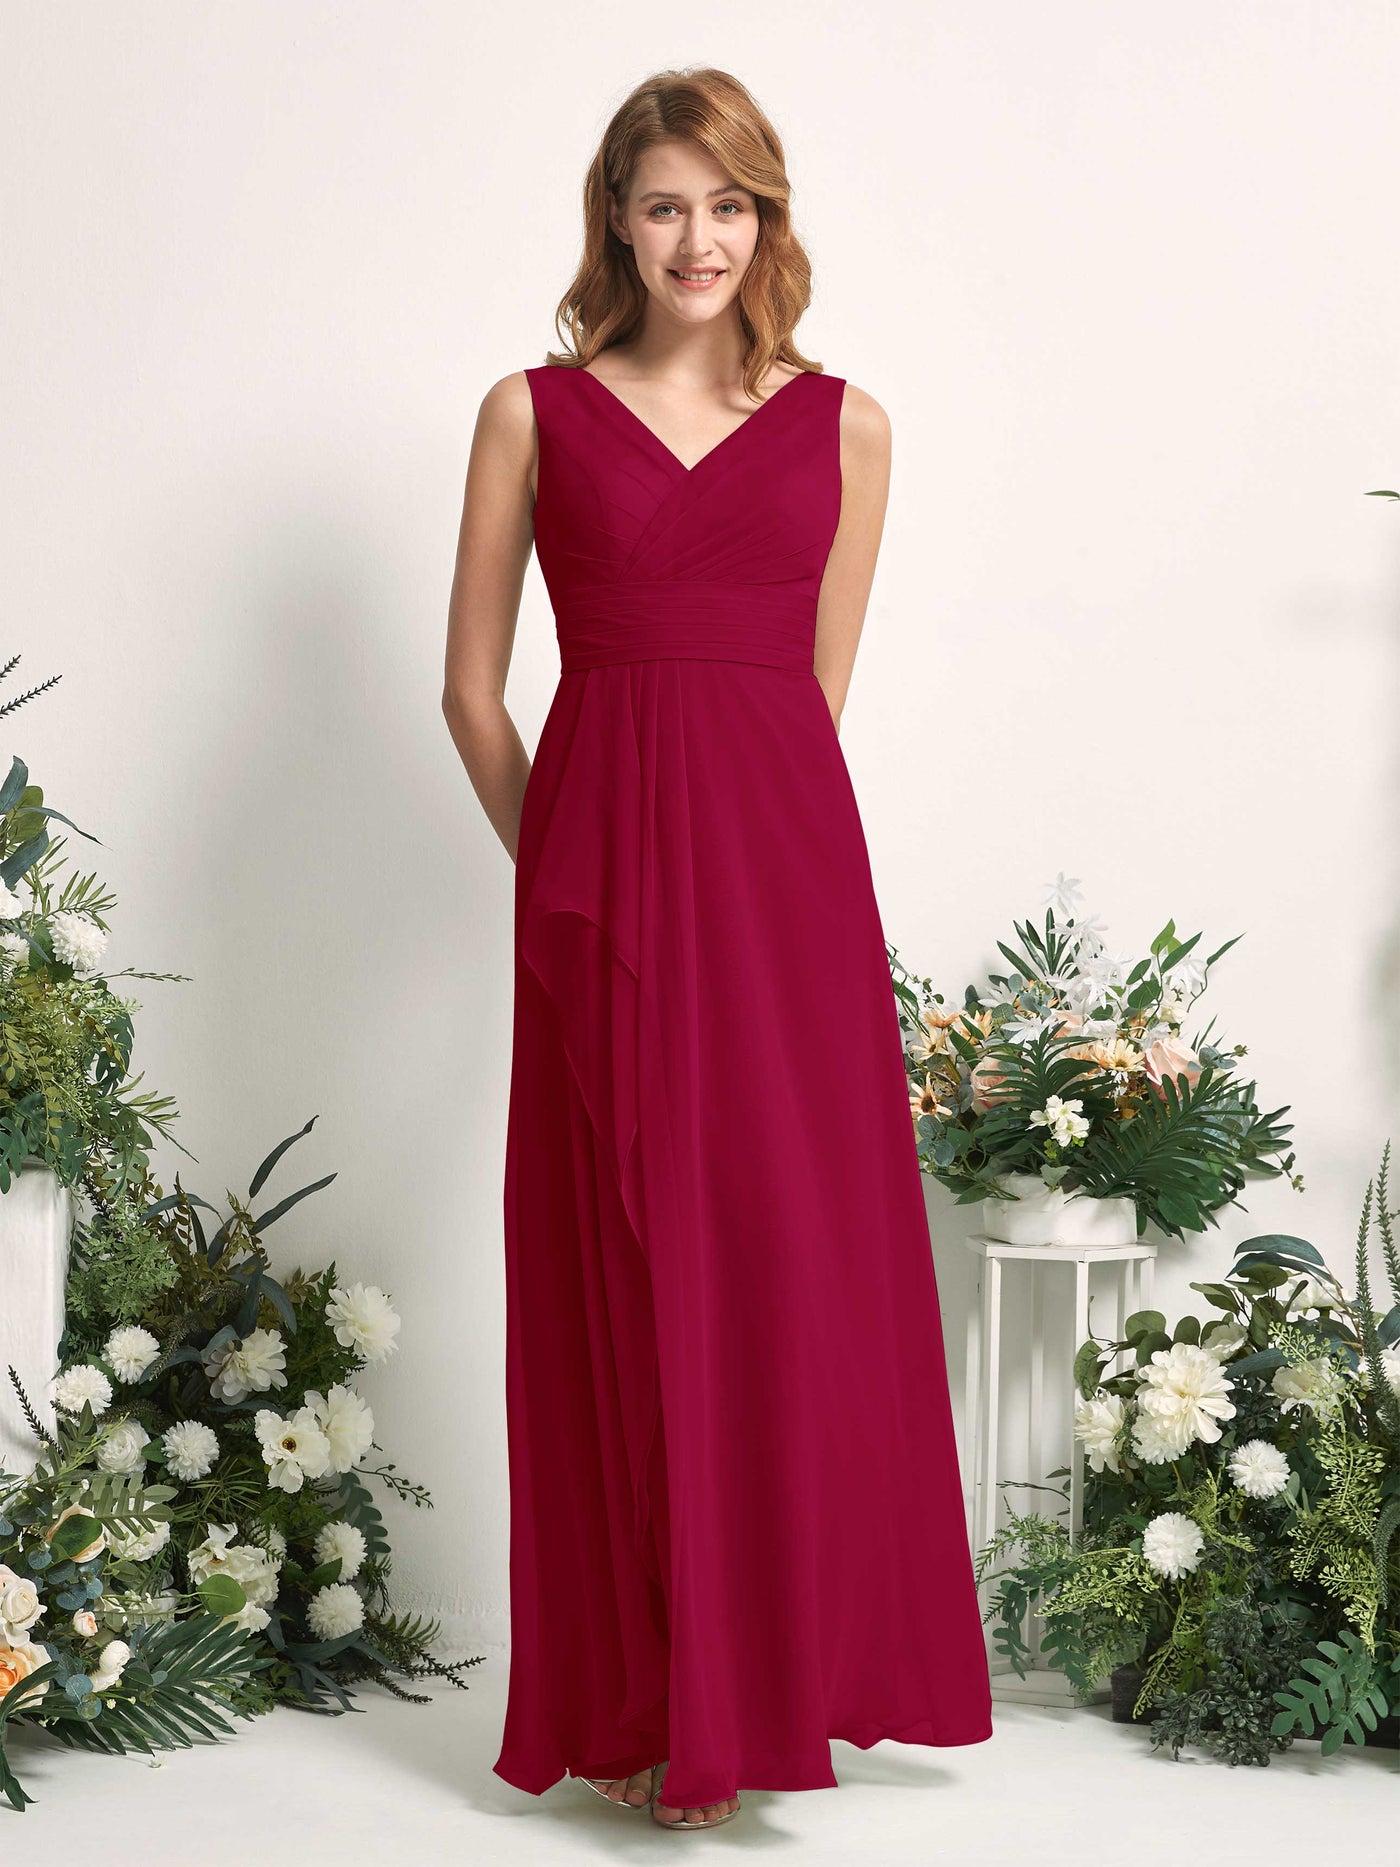 Bridesmaid Dress A-line Chiffon V-neck Full Length Sleeveless Wedding Party Dress - Jester Red (81227141)#color_jester-red